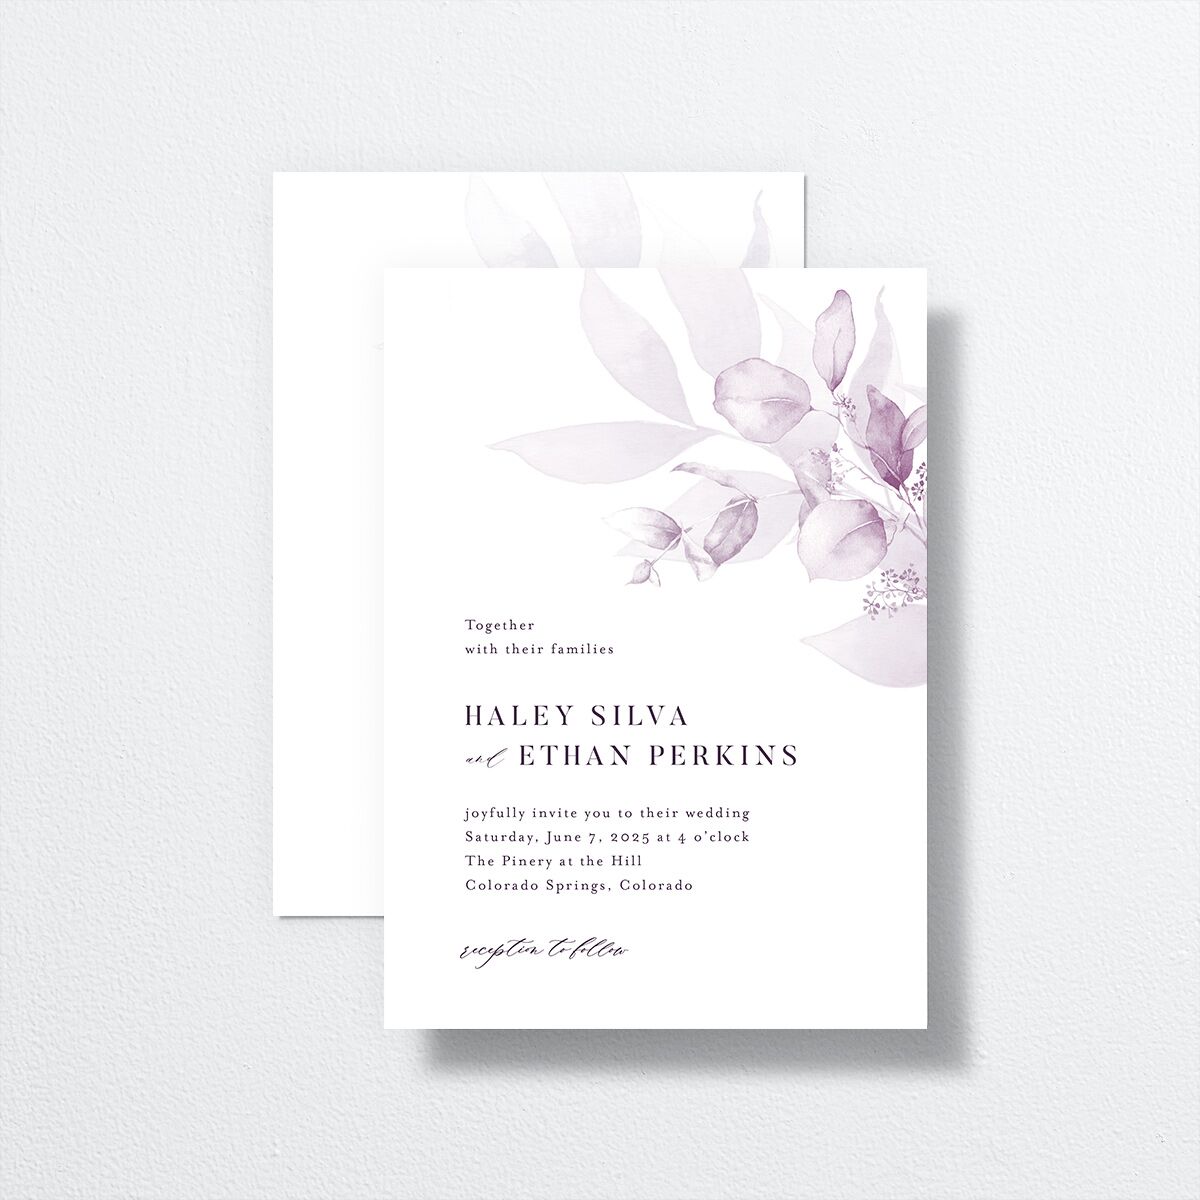 Romantic Greenery Wedding Invitations front-and-back in lavender